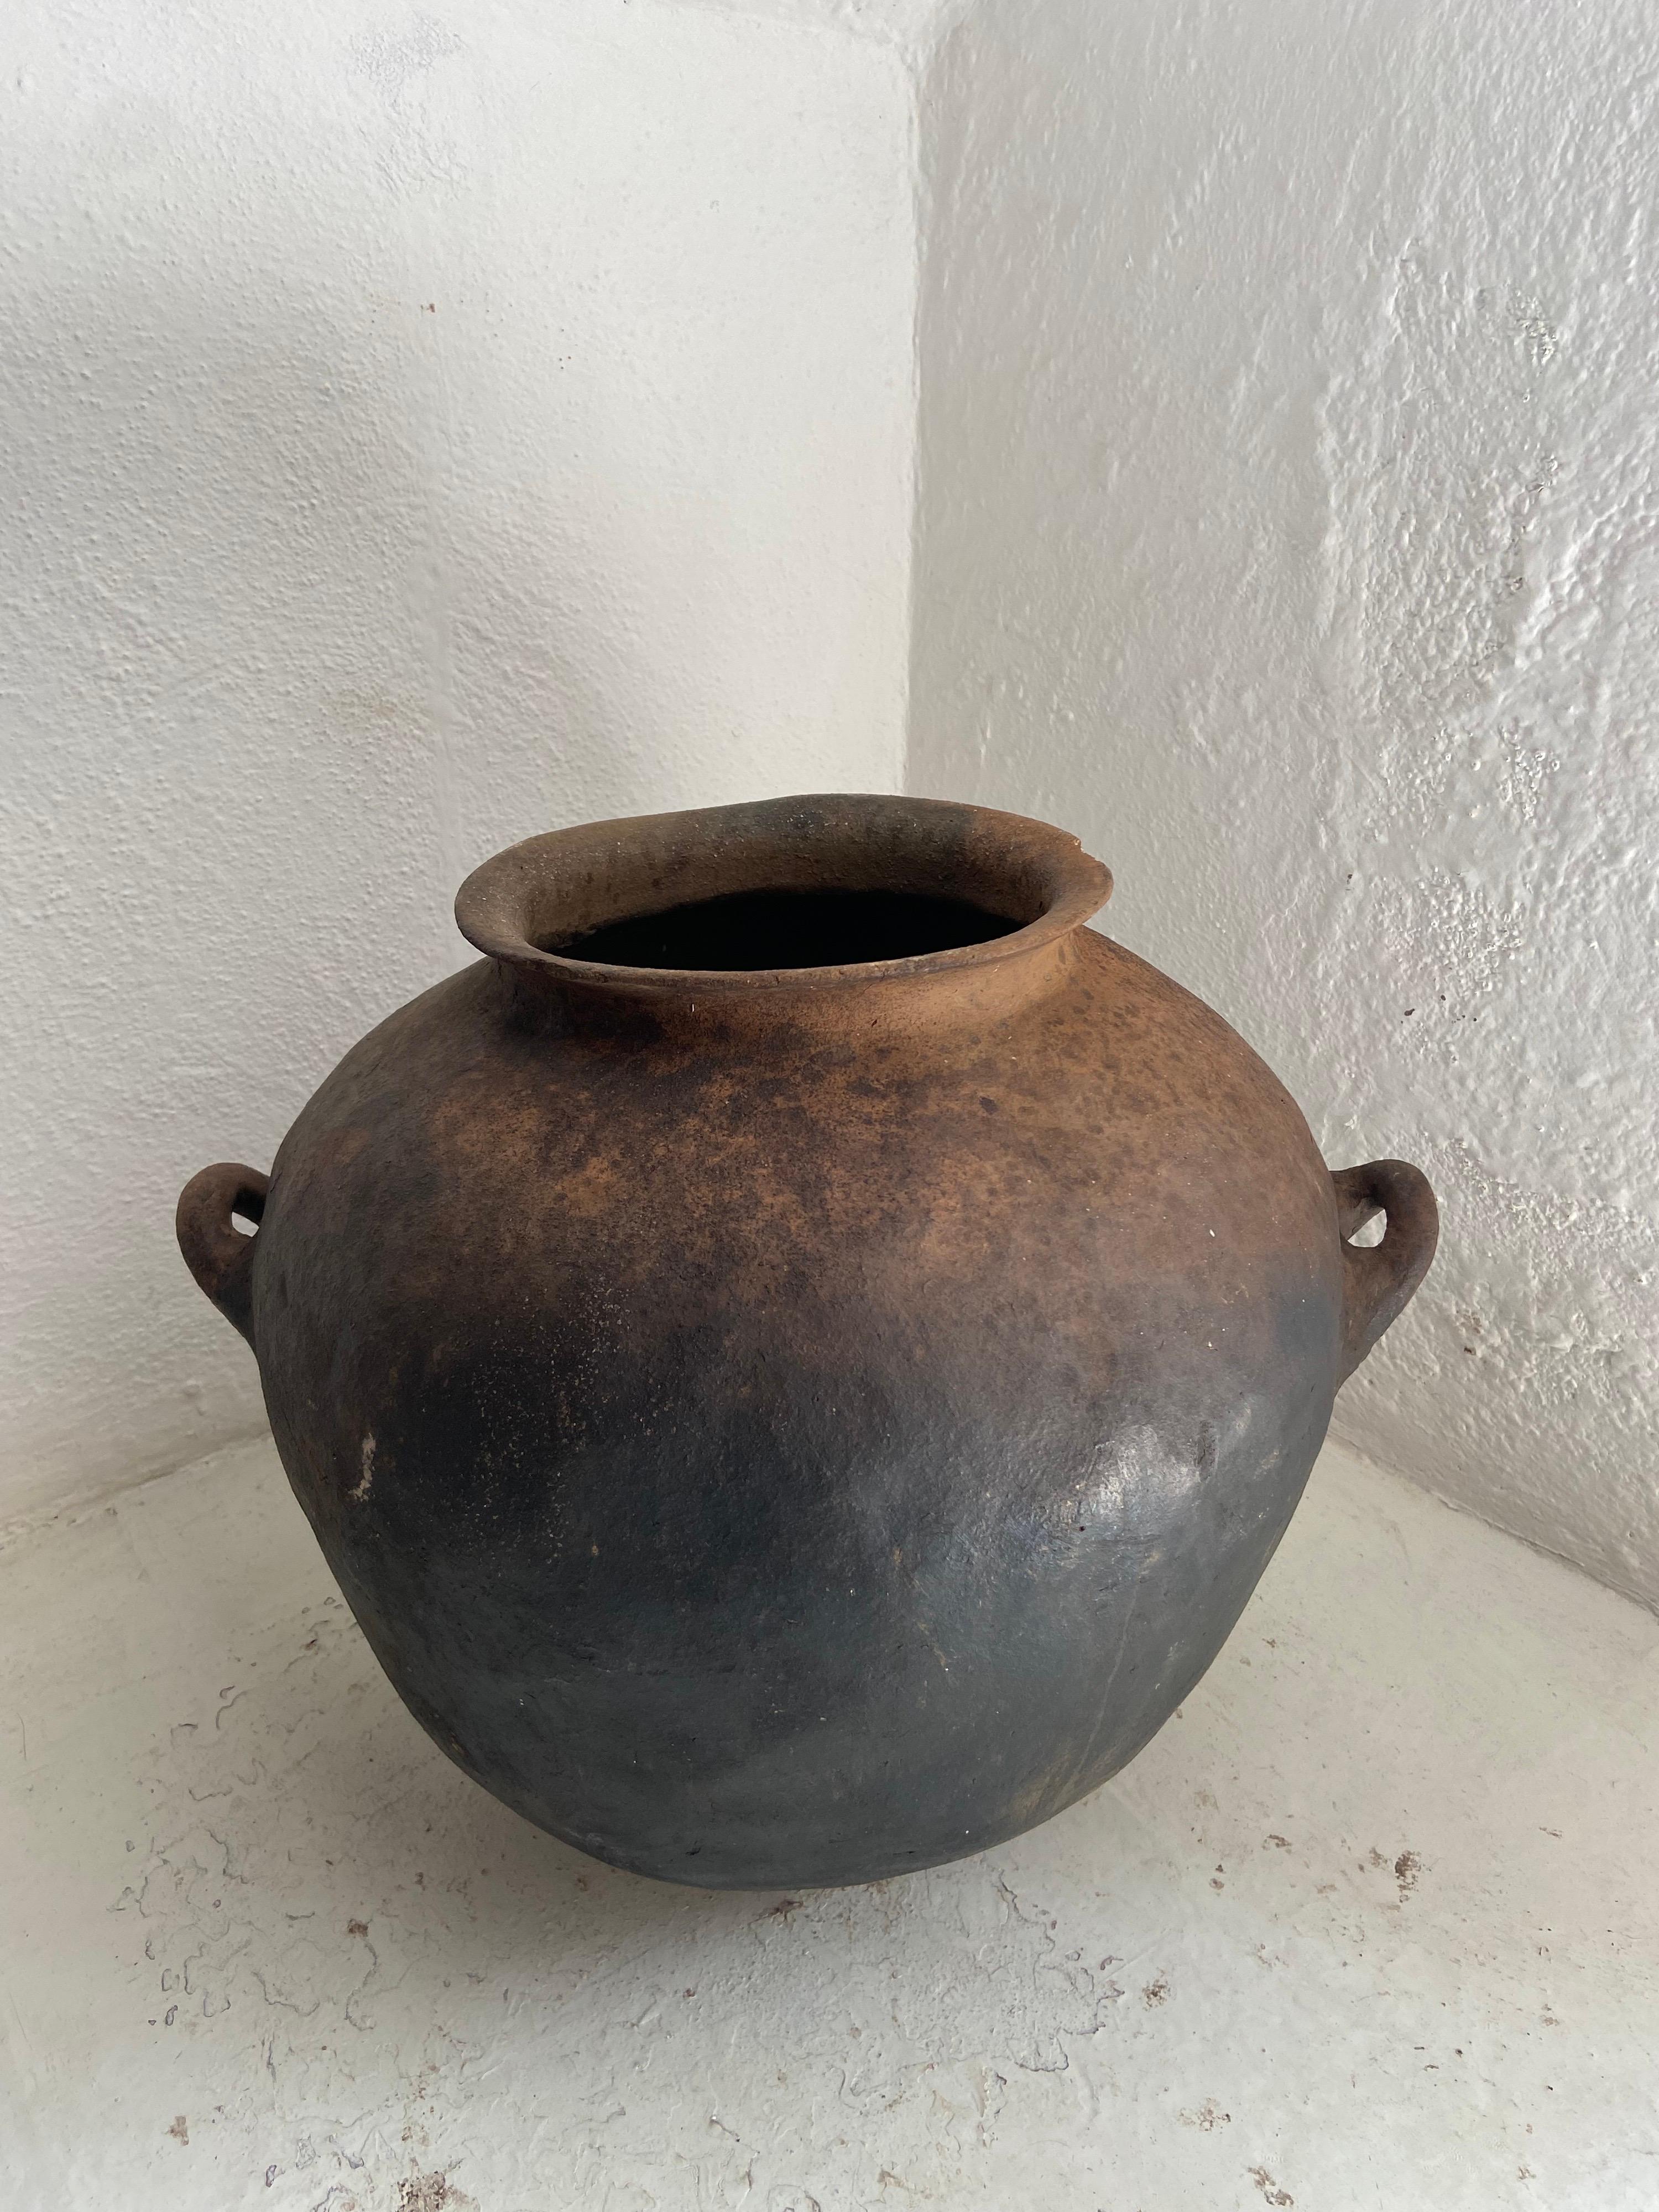 Ceramic Early 20th Century Water Jar from Mexico